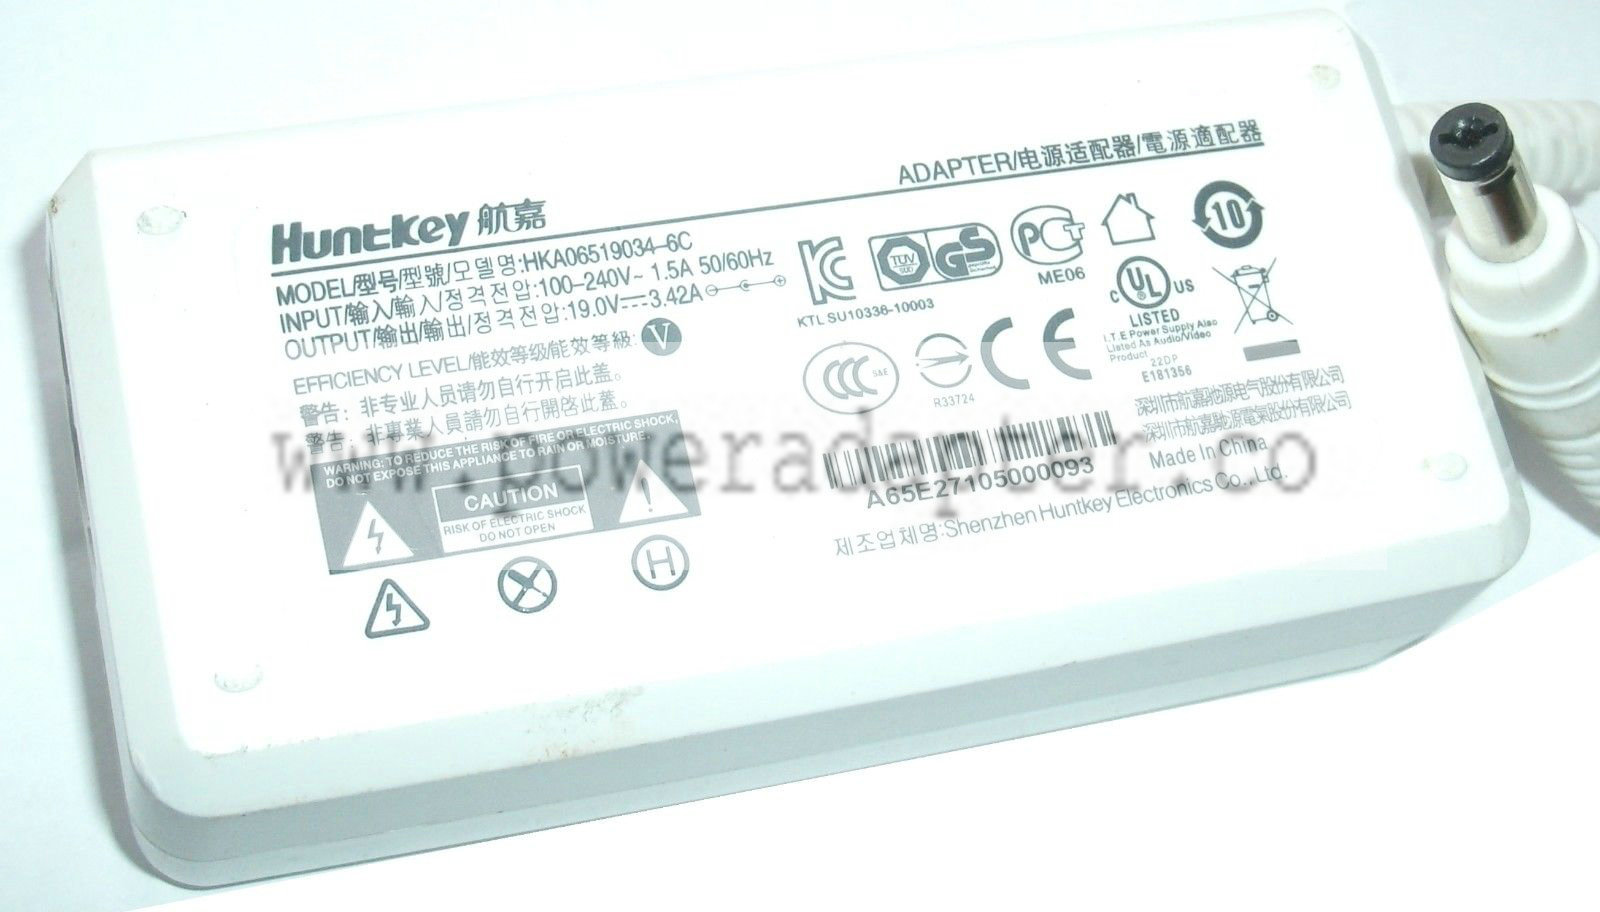 HUNTKEY POWER ADAPTER HKA06519034-6C 19.0V 3.42A HI THERE AND WELCOME TO THATS HOW INTERNATIONAL LTD WE ARE PROFESS